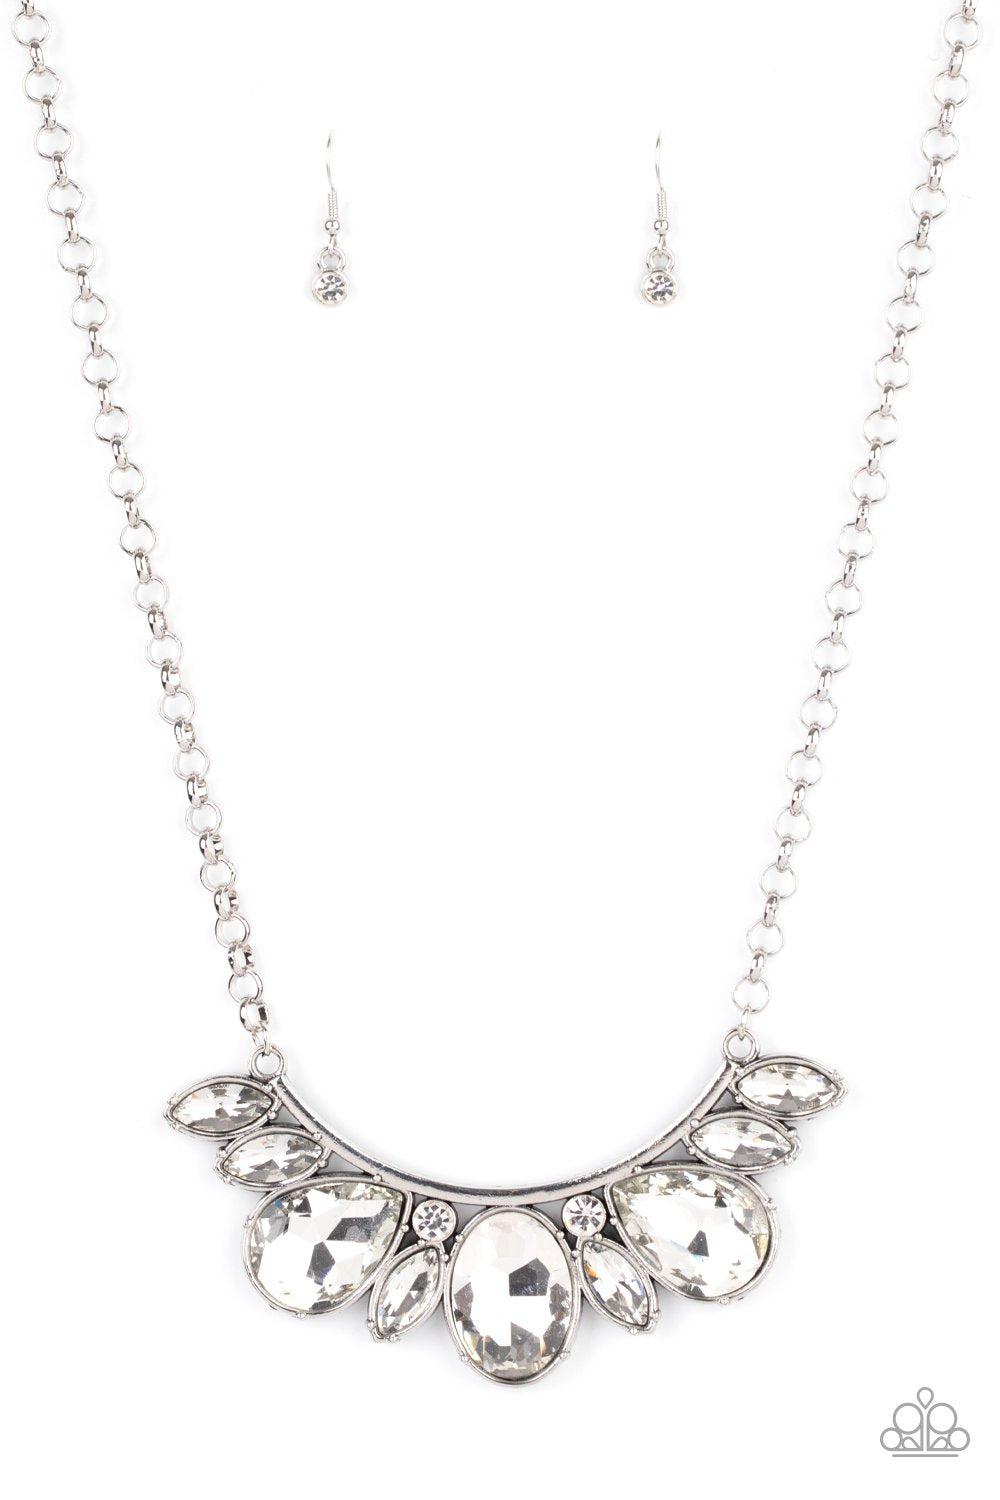 Never SLAY Never White Rhinestone Necklace - Paparazzi Accessories Life of the Party Exclusive May 2021- lightbox - CarasShop.com - $5 Jewelry by Cara Jewels